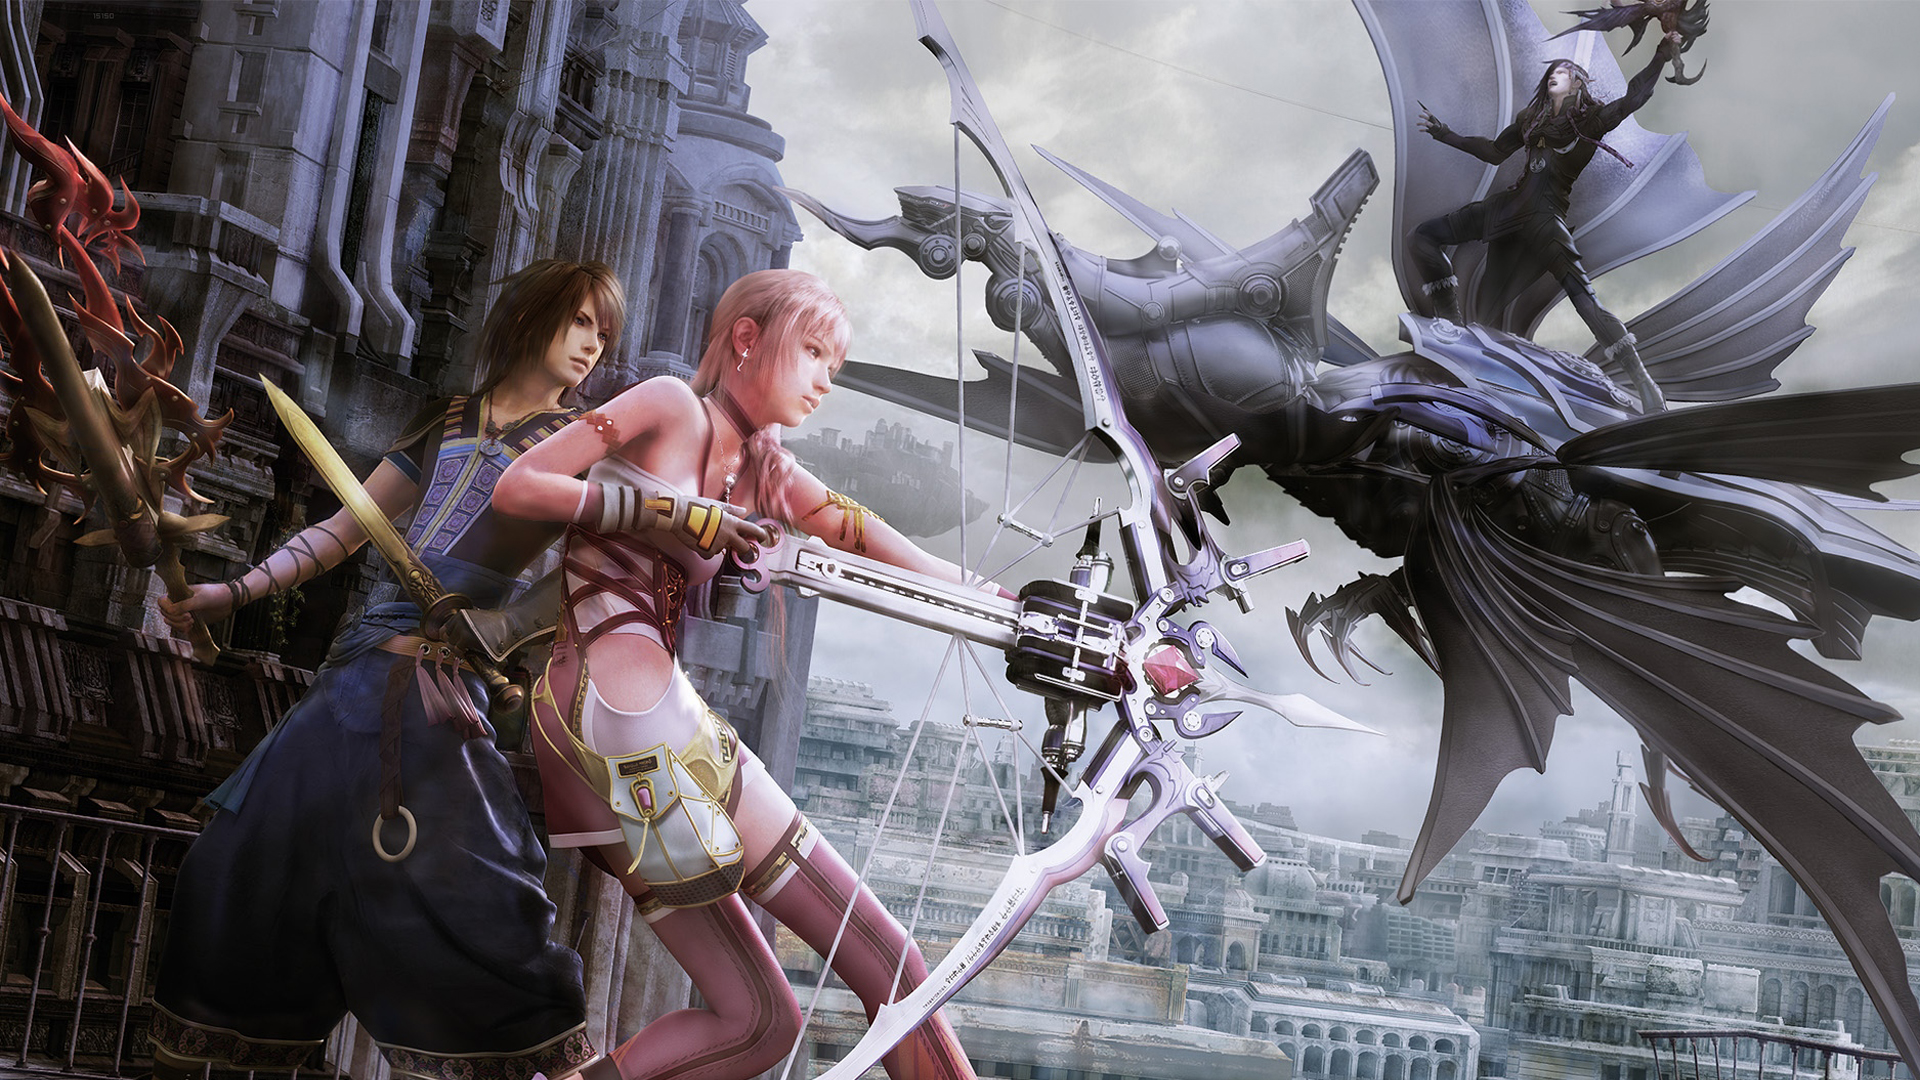 Video Game Final Fantasy Xiii 2 1920x1080